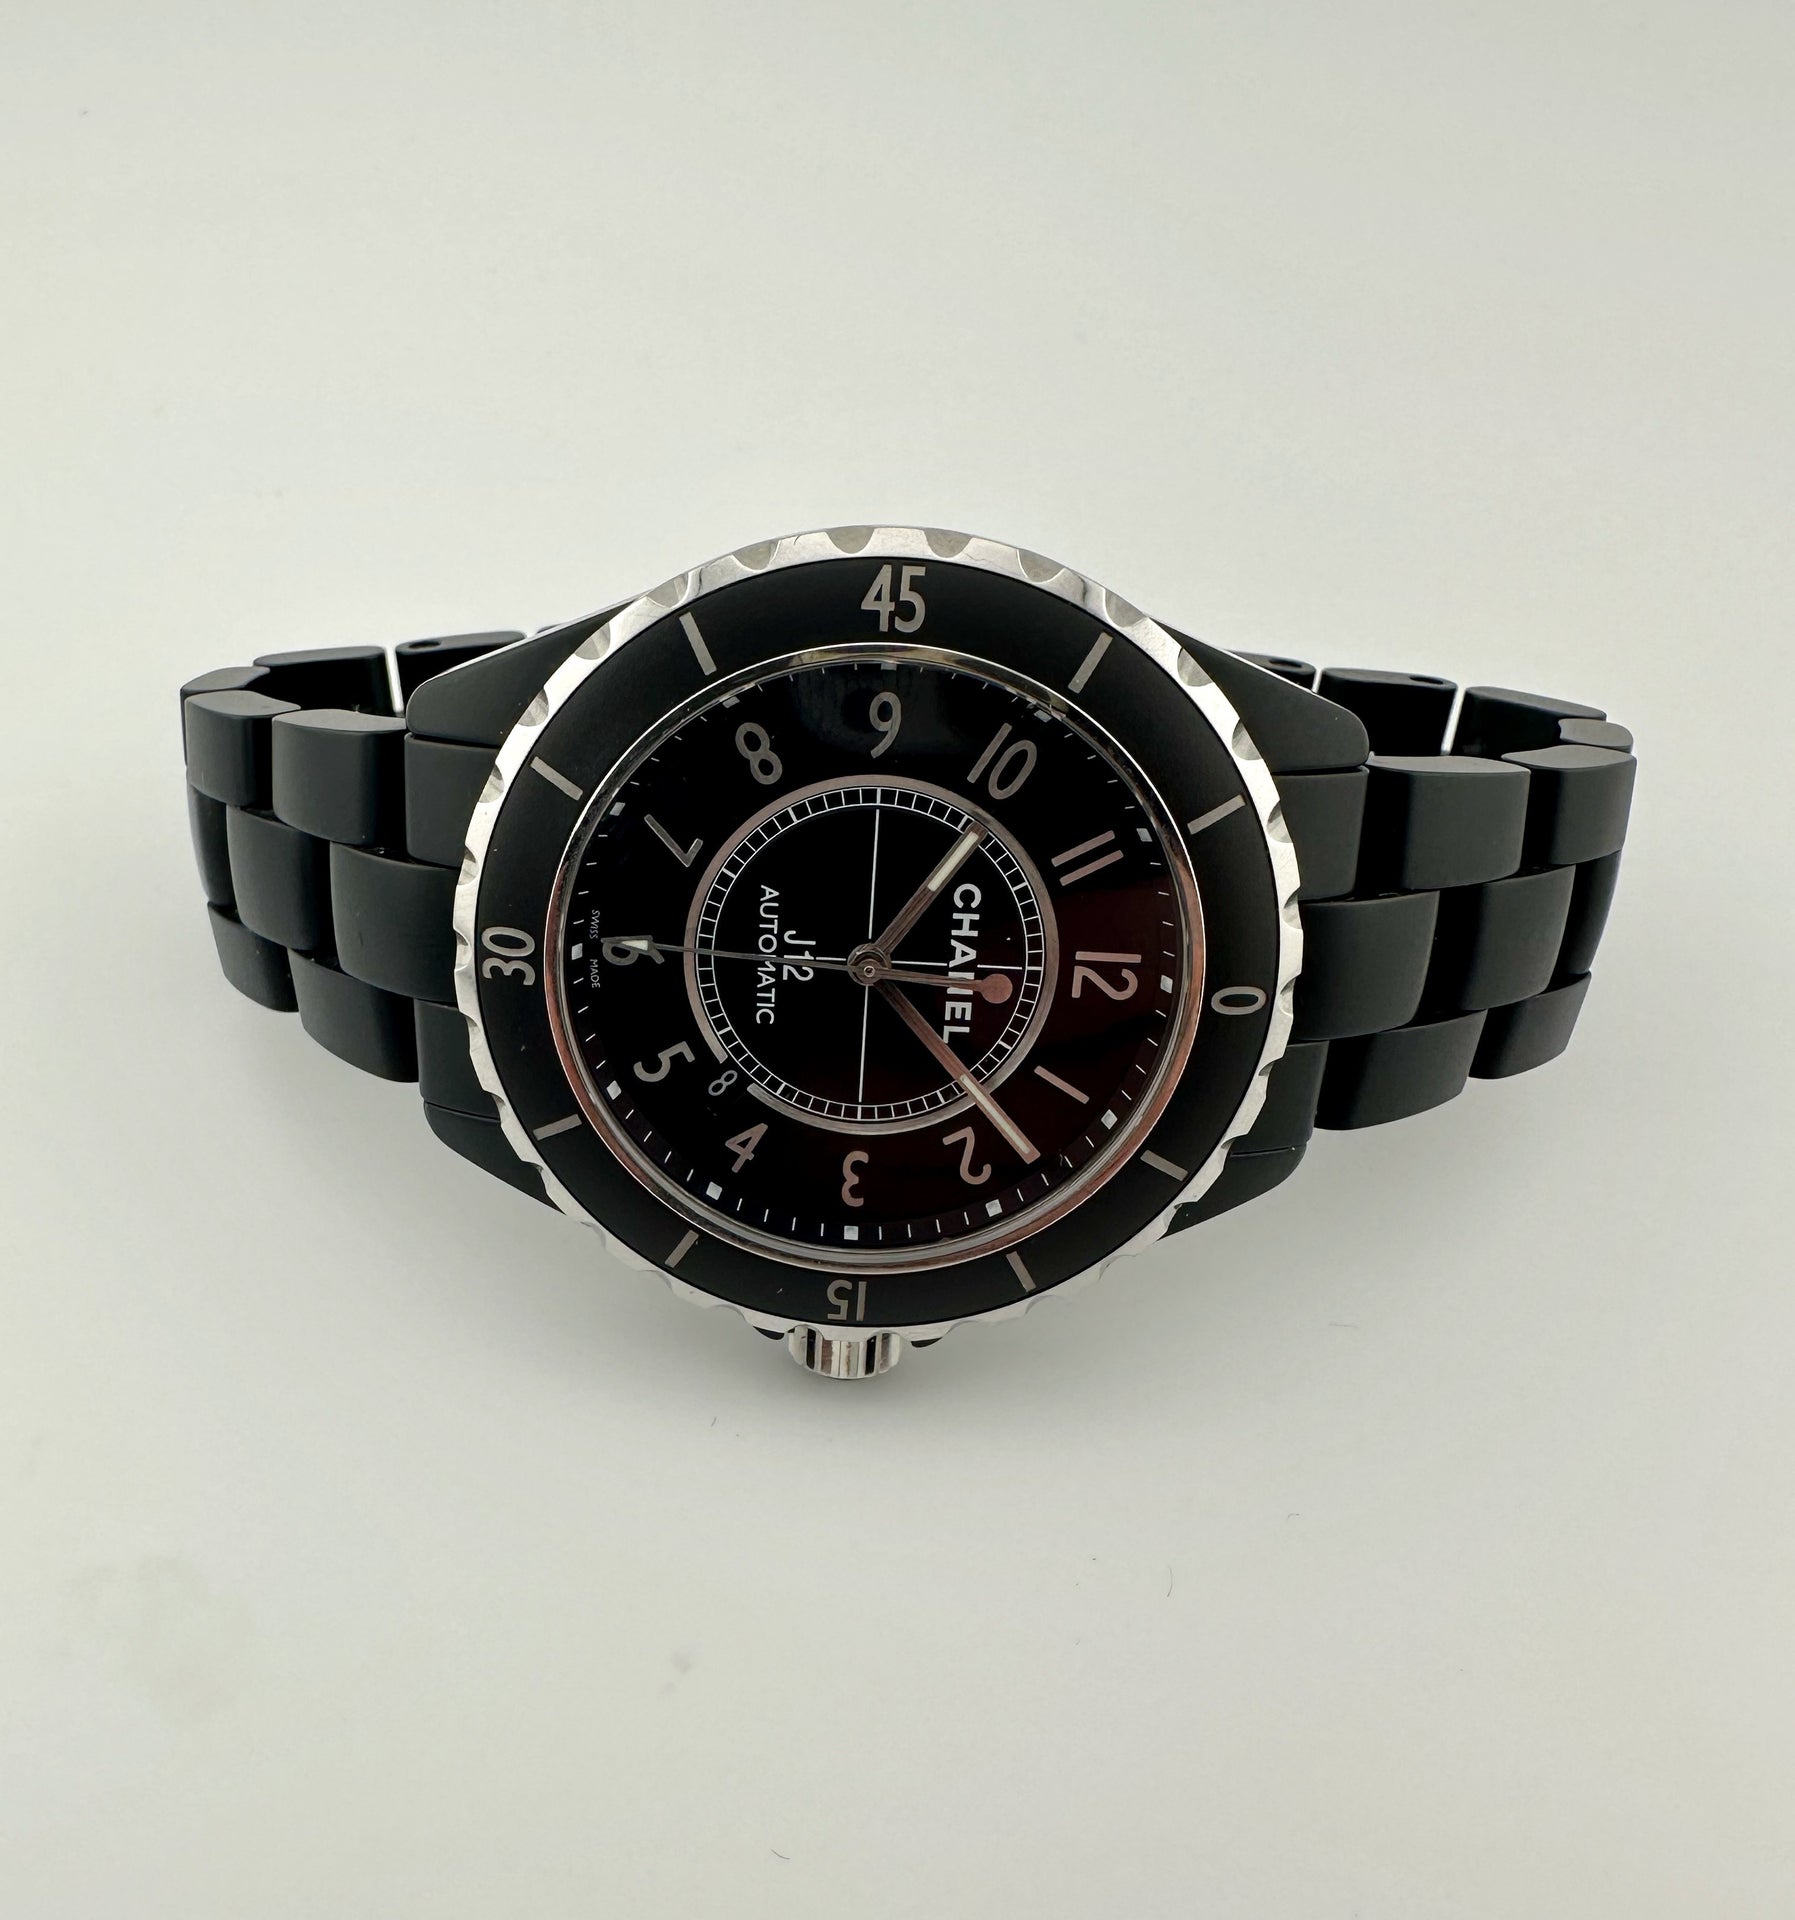 Chanel J12 Automatic Black Dial Unisex Watch H6185, Automatic Movement, Ceramic 1 Strap, 38 mm Case in Black / Grey